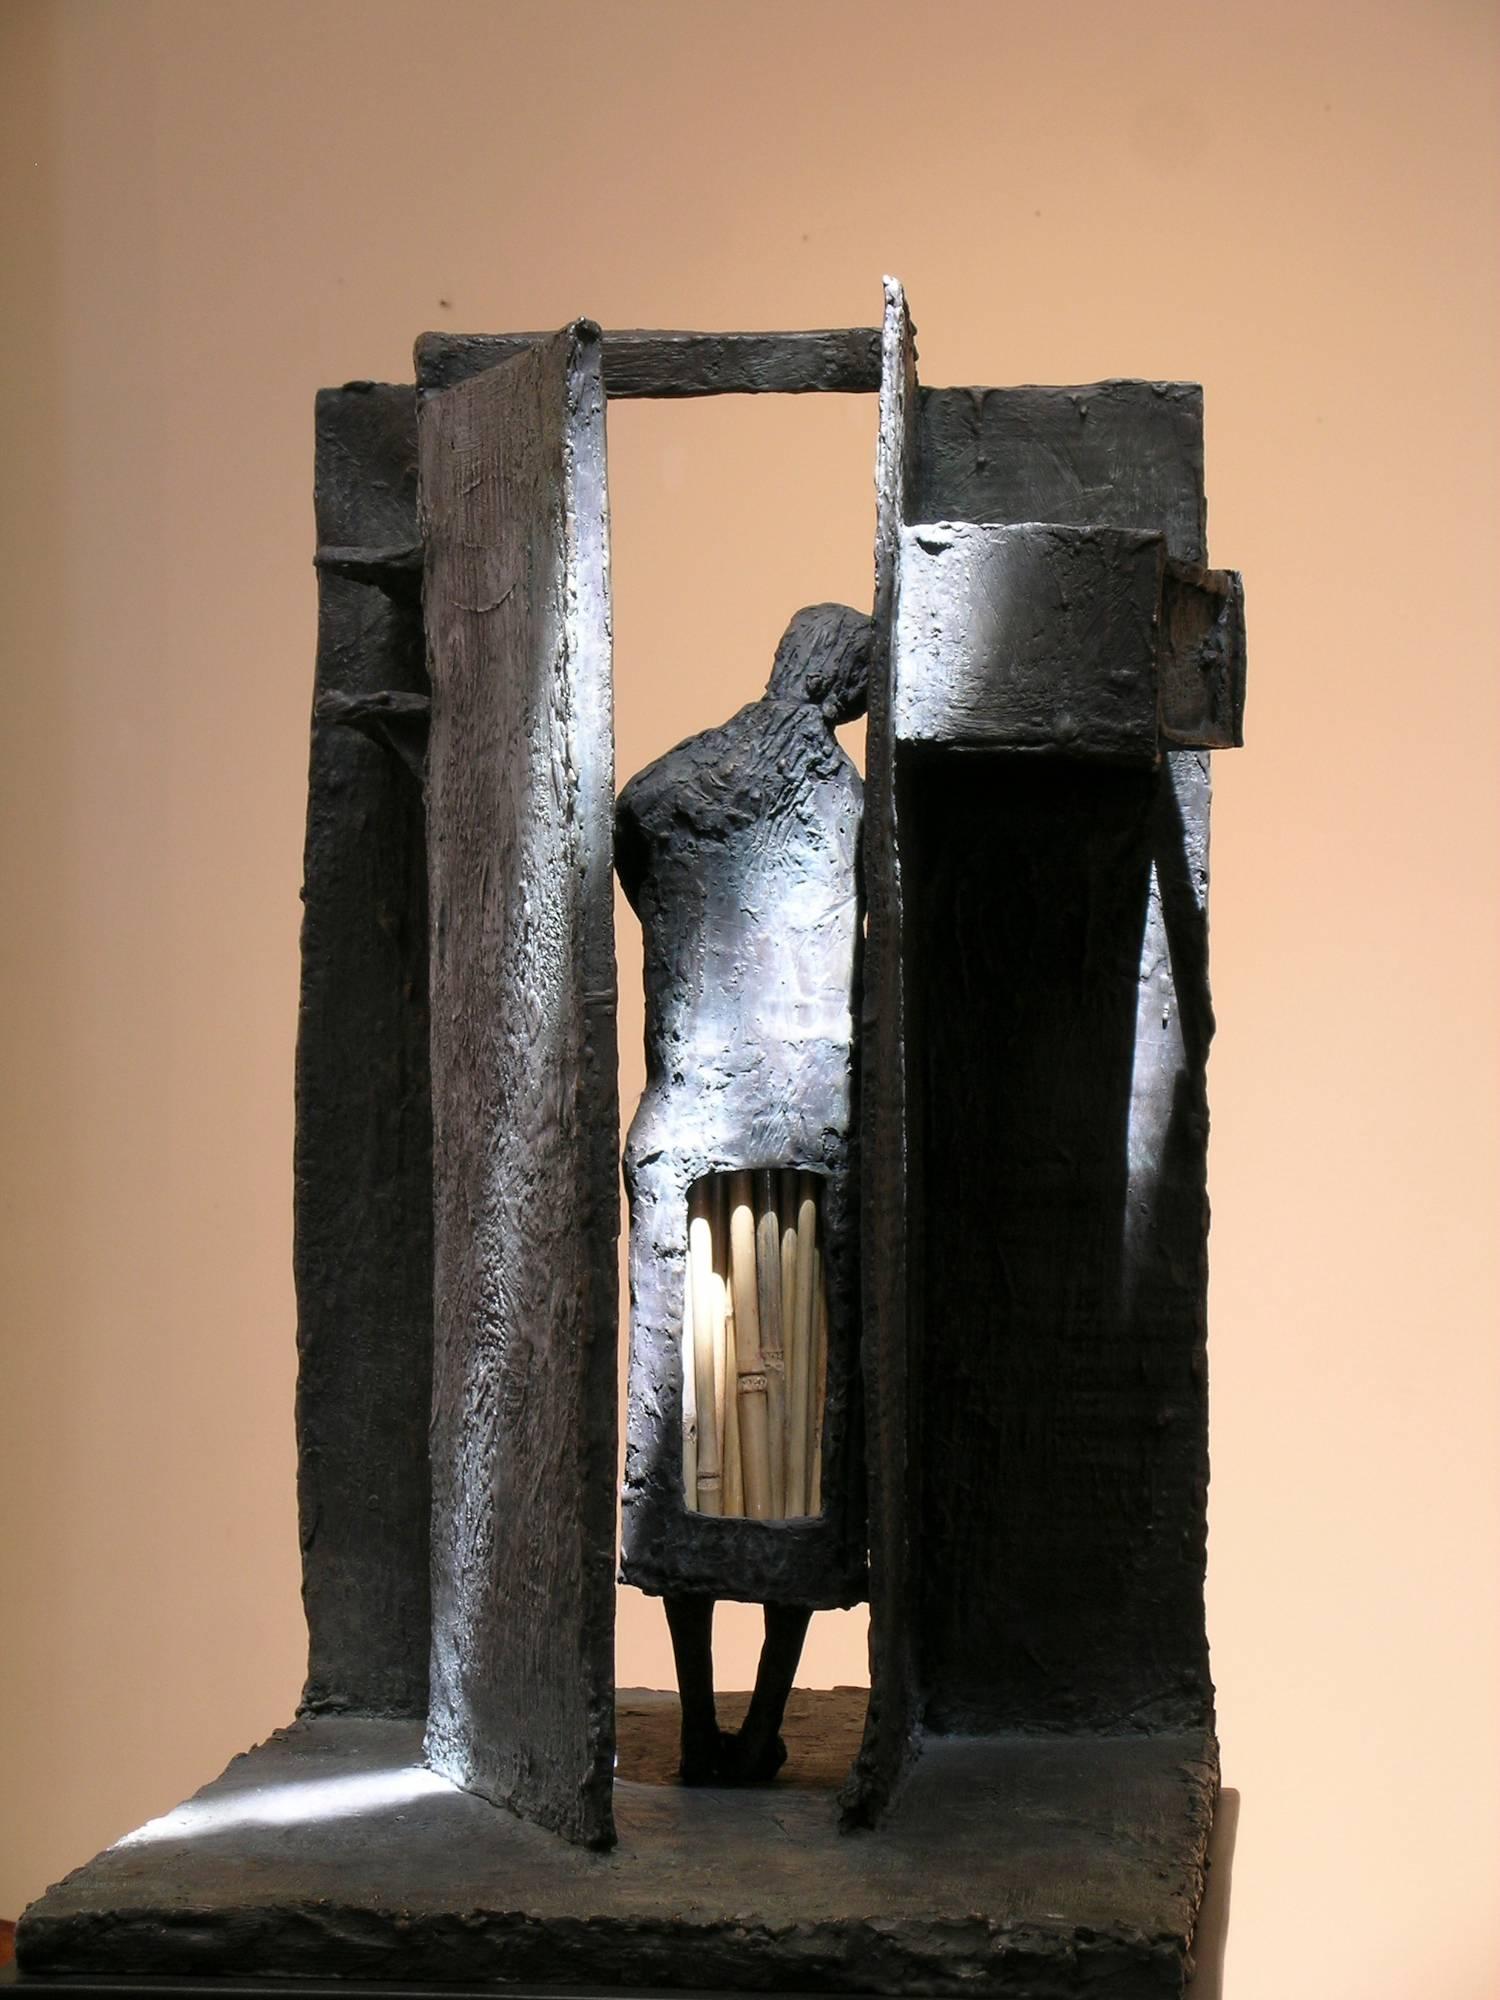 Empty Cupboard (Alacena Vacia), bronze and straw sculpture, Eduardo Oropeza

bronze sculpture with straw

In my hollow abode I wait for you, oh soul of hope,
that you can be so bold.
In the hour when famishment is my faithful companion,
I search the